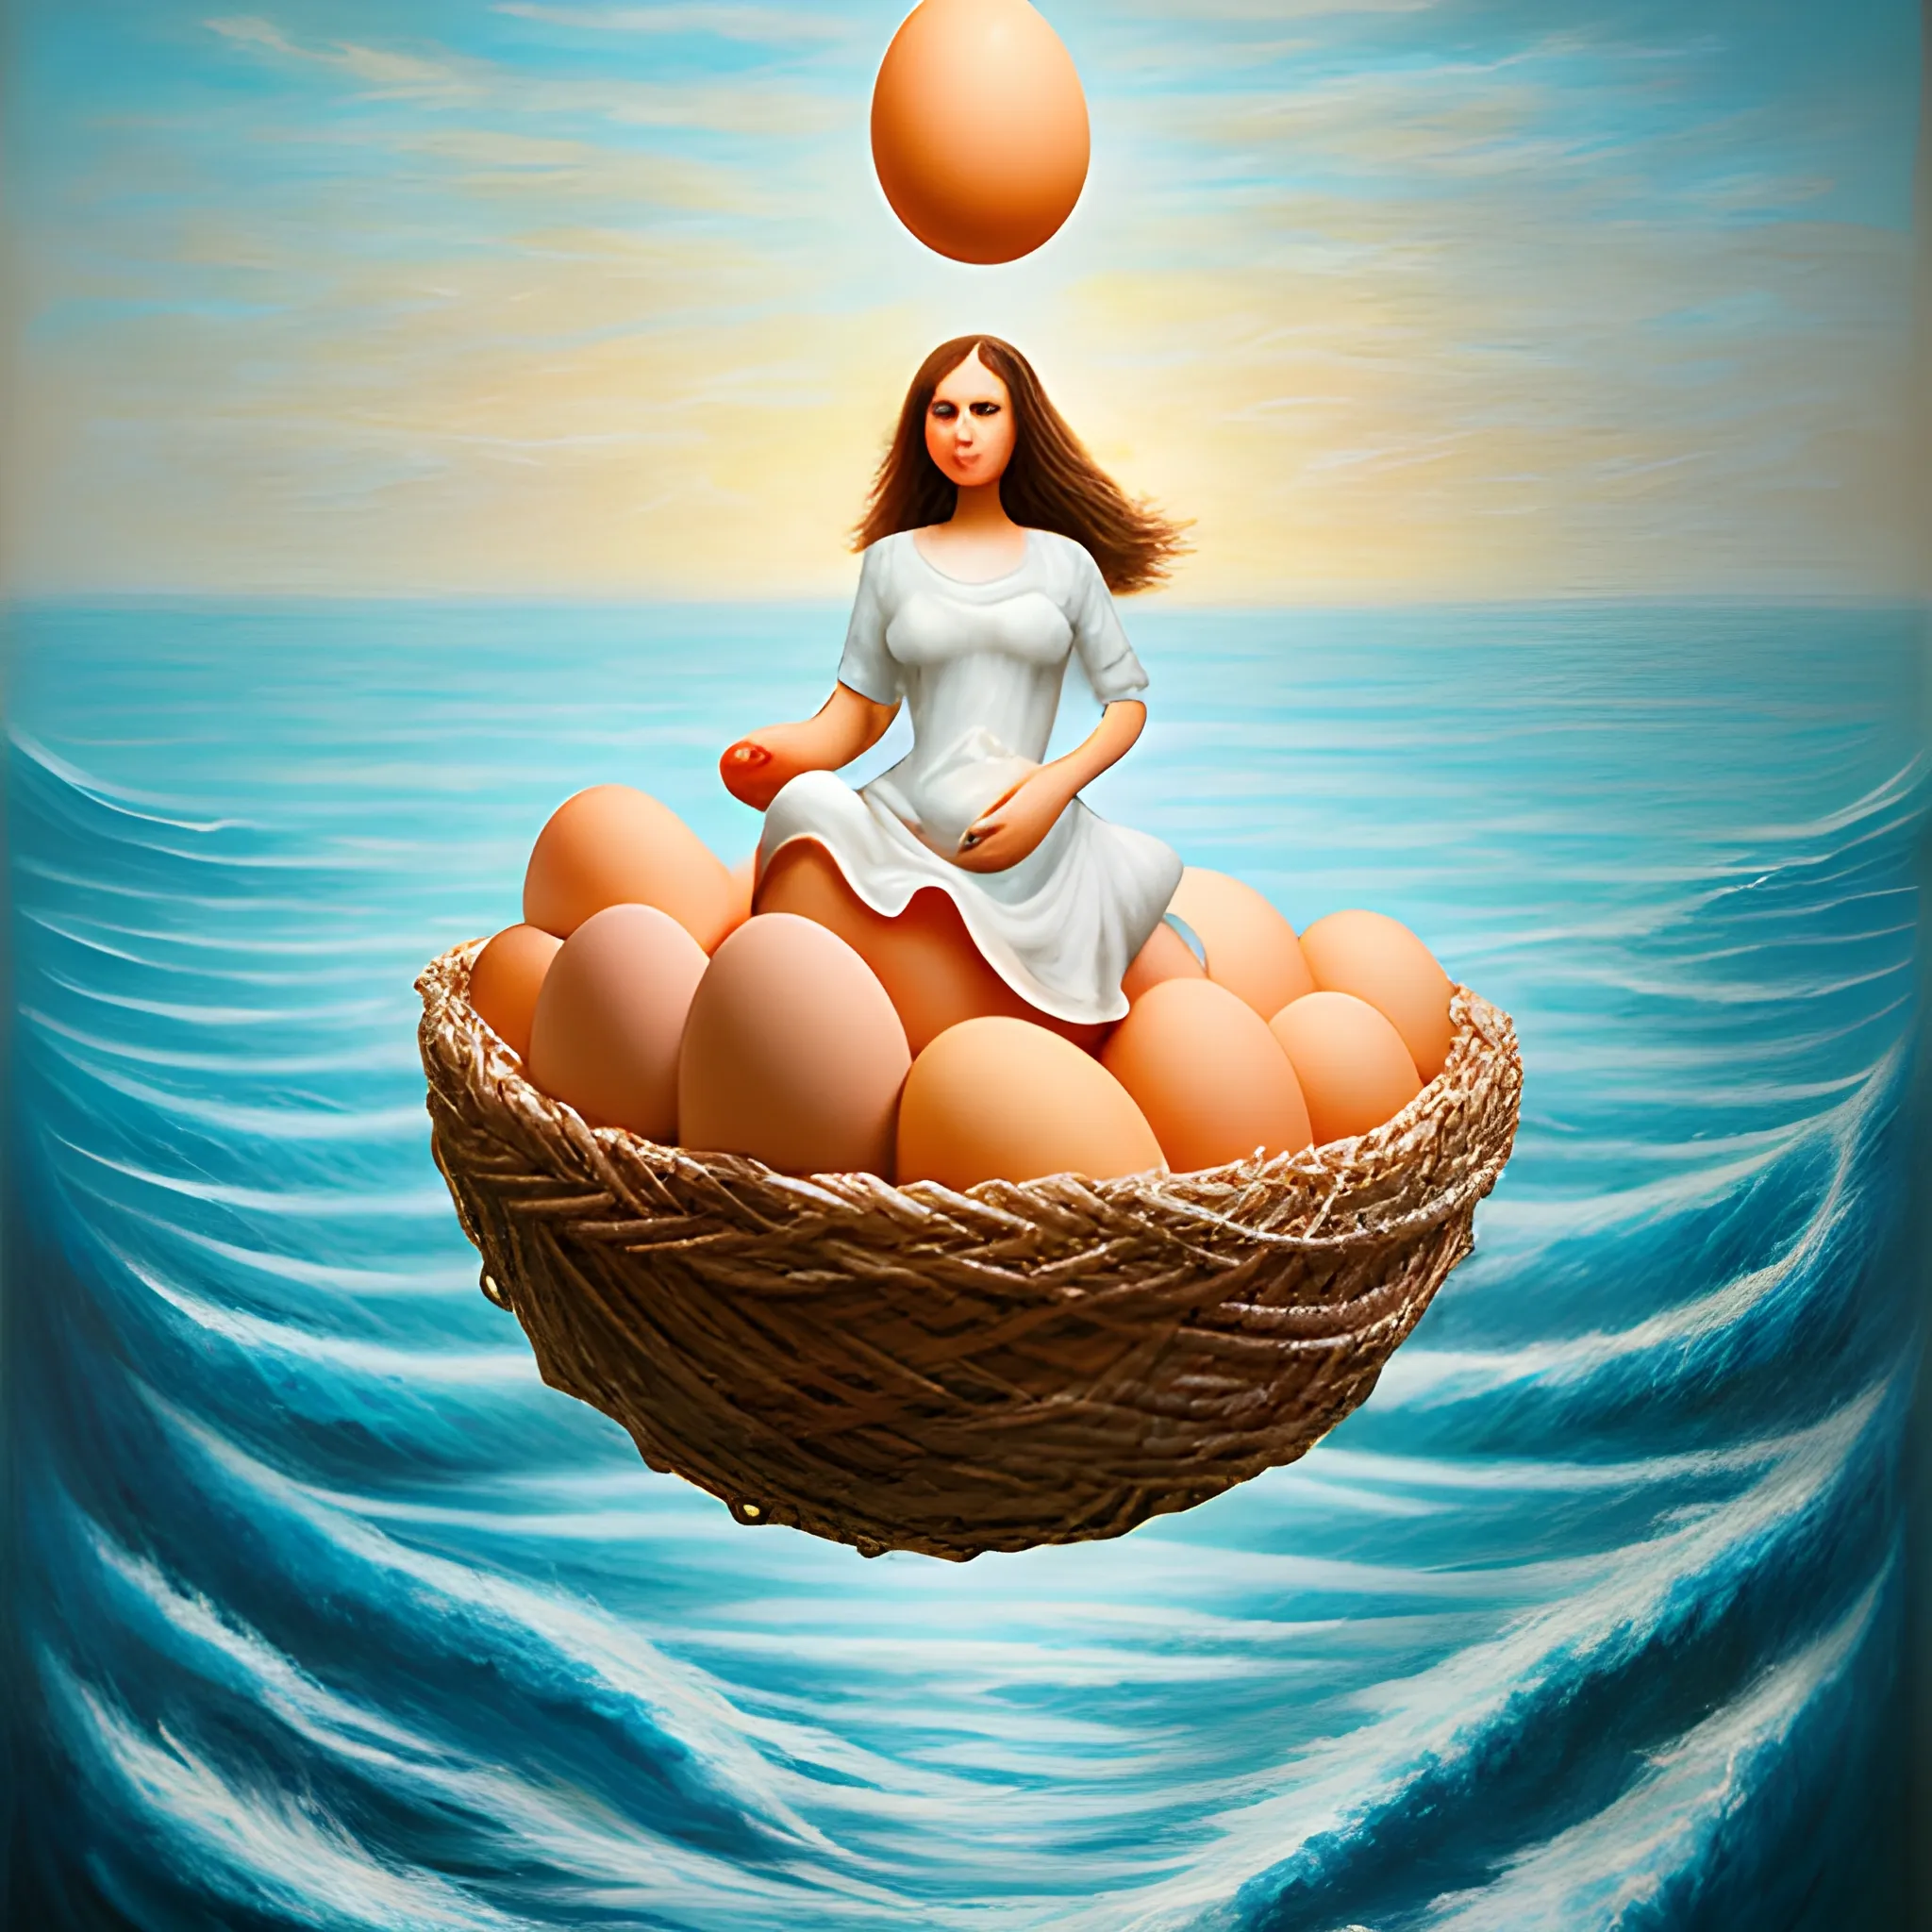 surreal, woman with eggs around, over a sea, 3D, Oil Painting